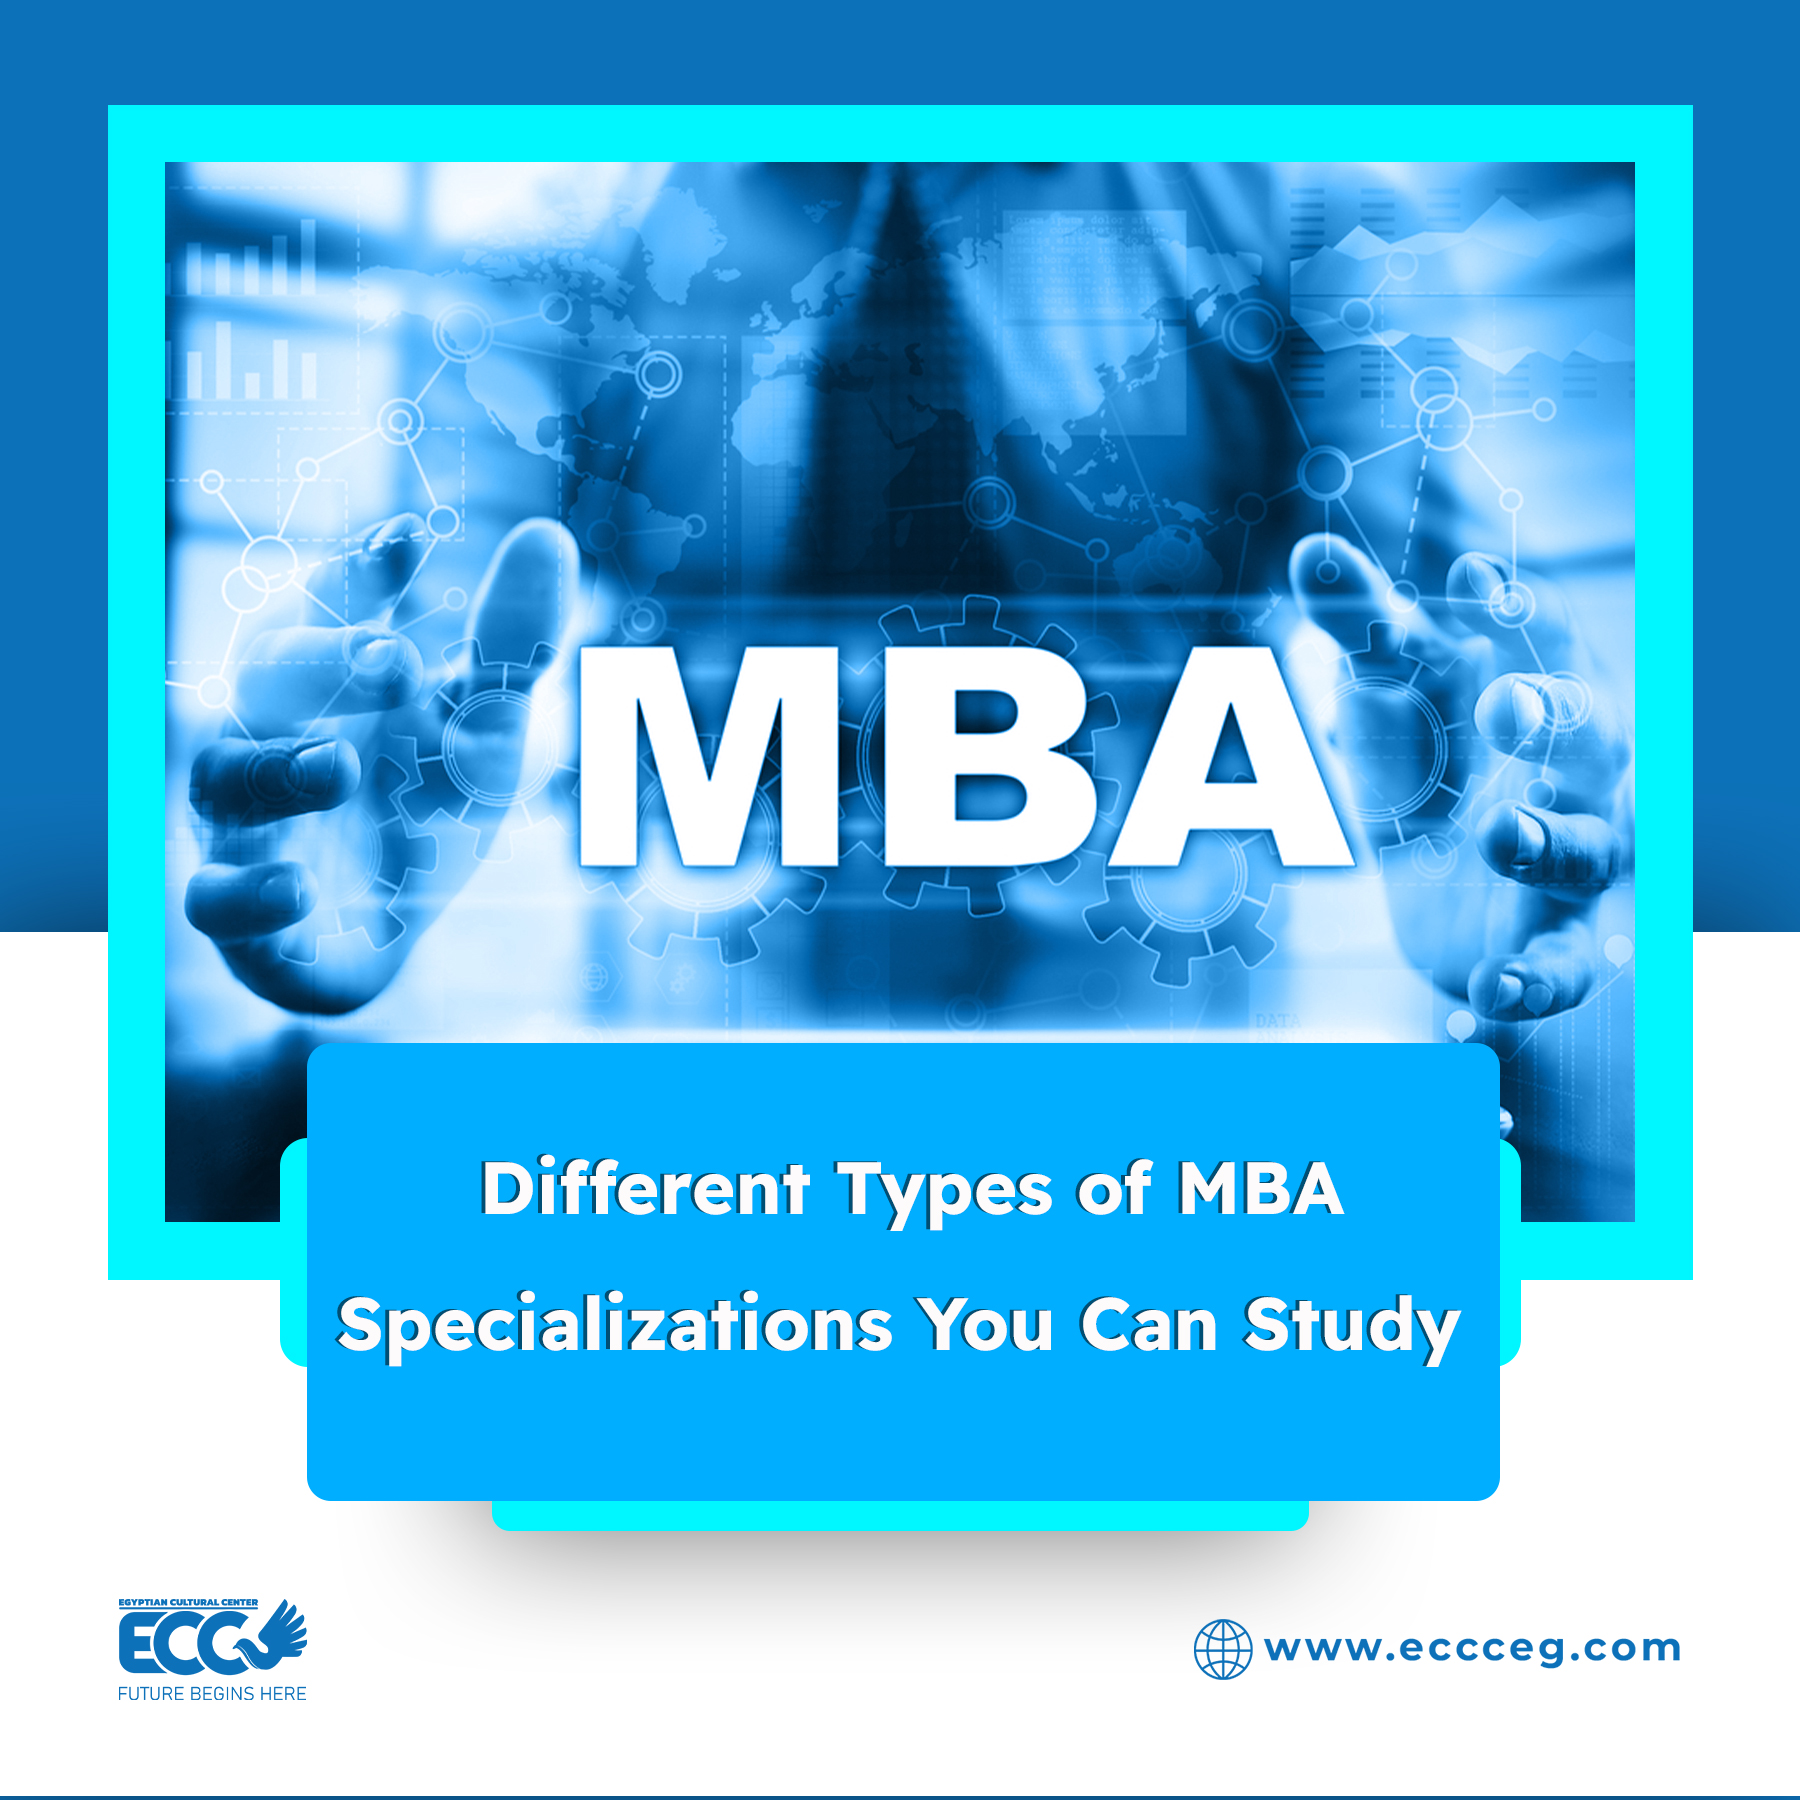 8 Types of MBA Specializations You Can Study